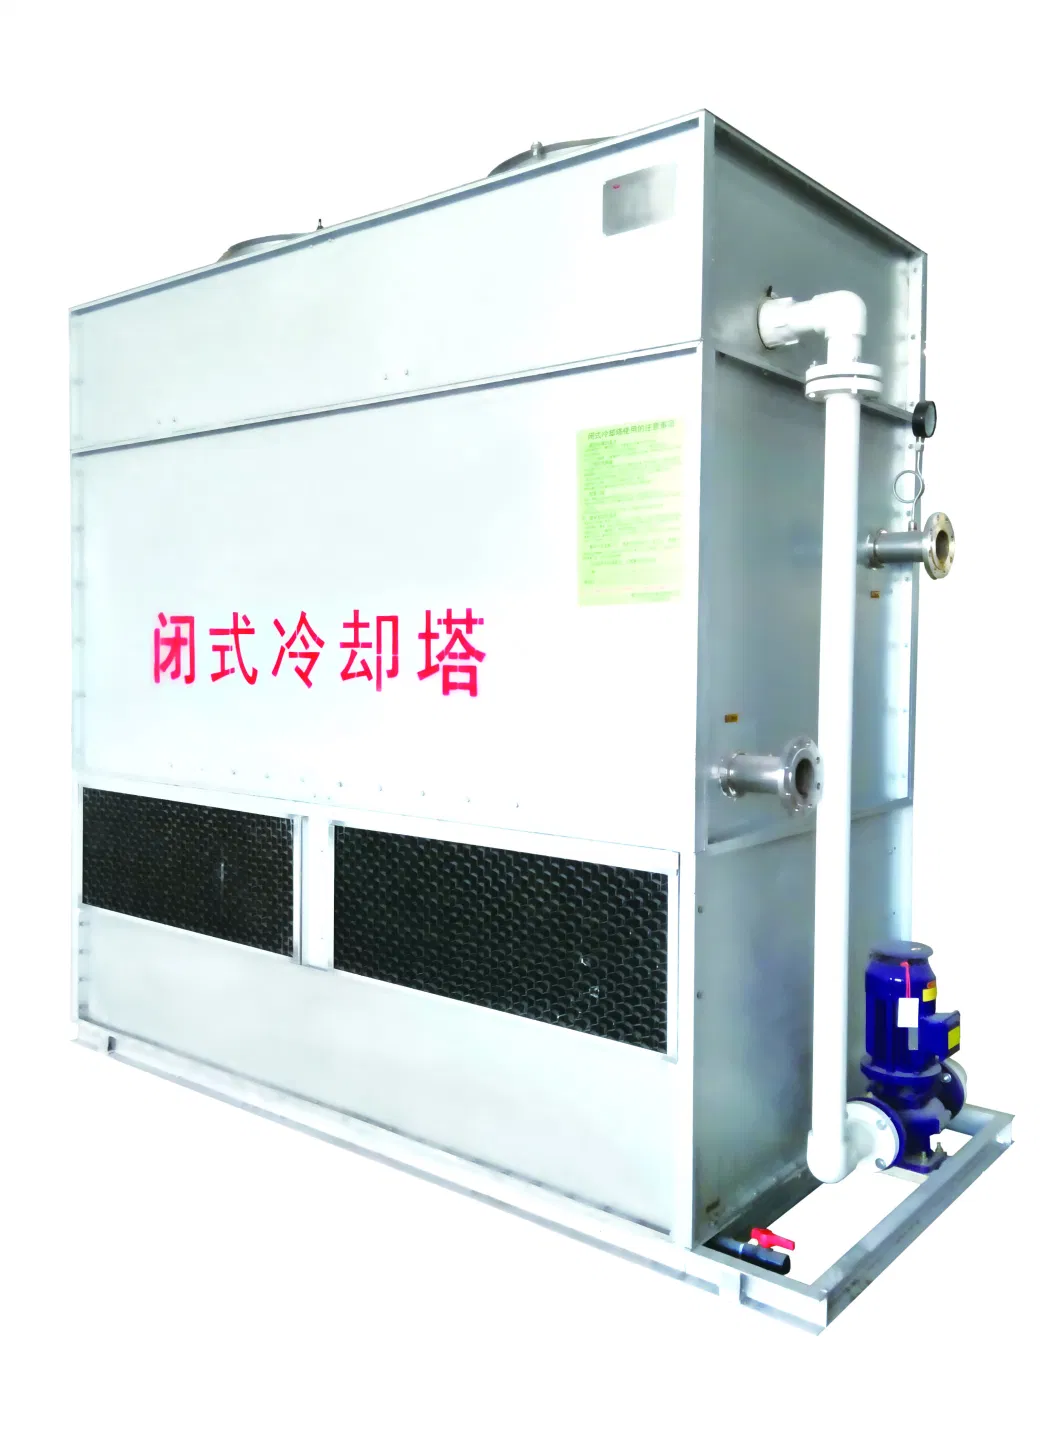 Hydraulic Tilting Induction Electric Furnace for Melting Metals with 10 Capacity Body Sand Casting